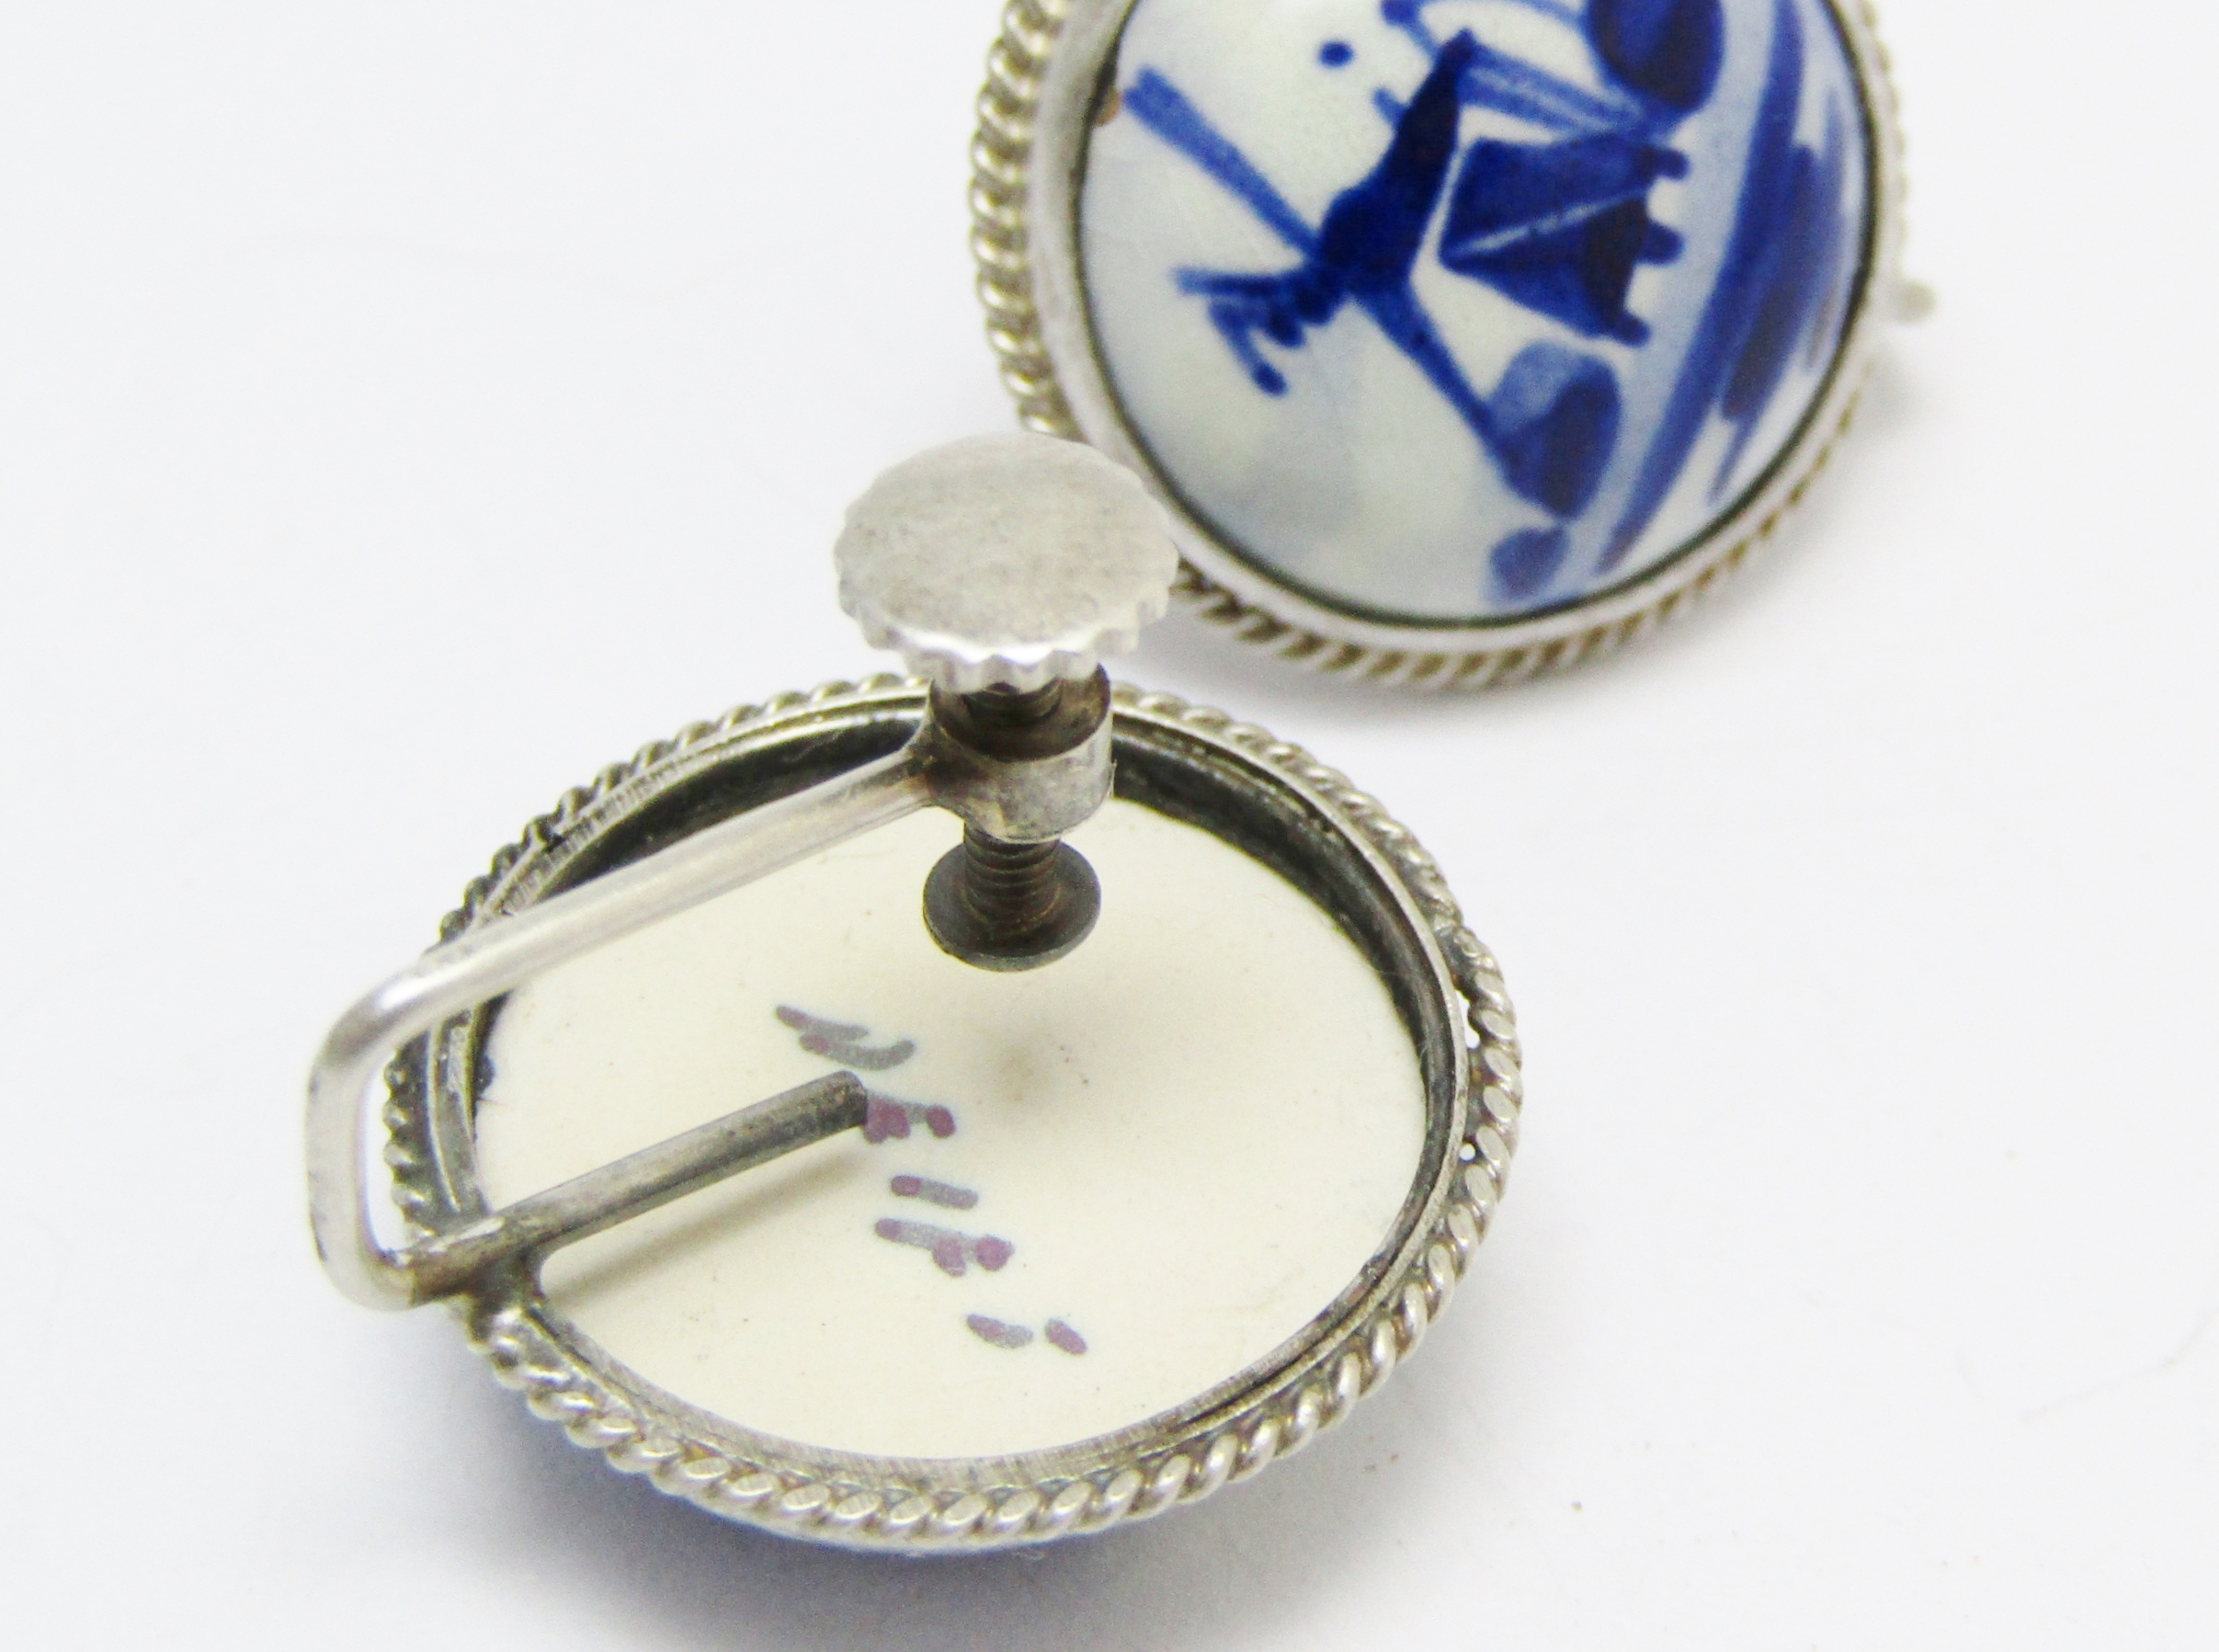 A Lovely Large Pair of Delft Screw Back Earrings in Sterling Silver.